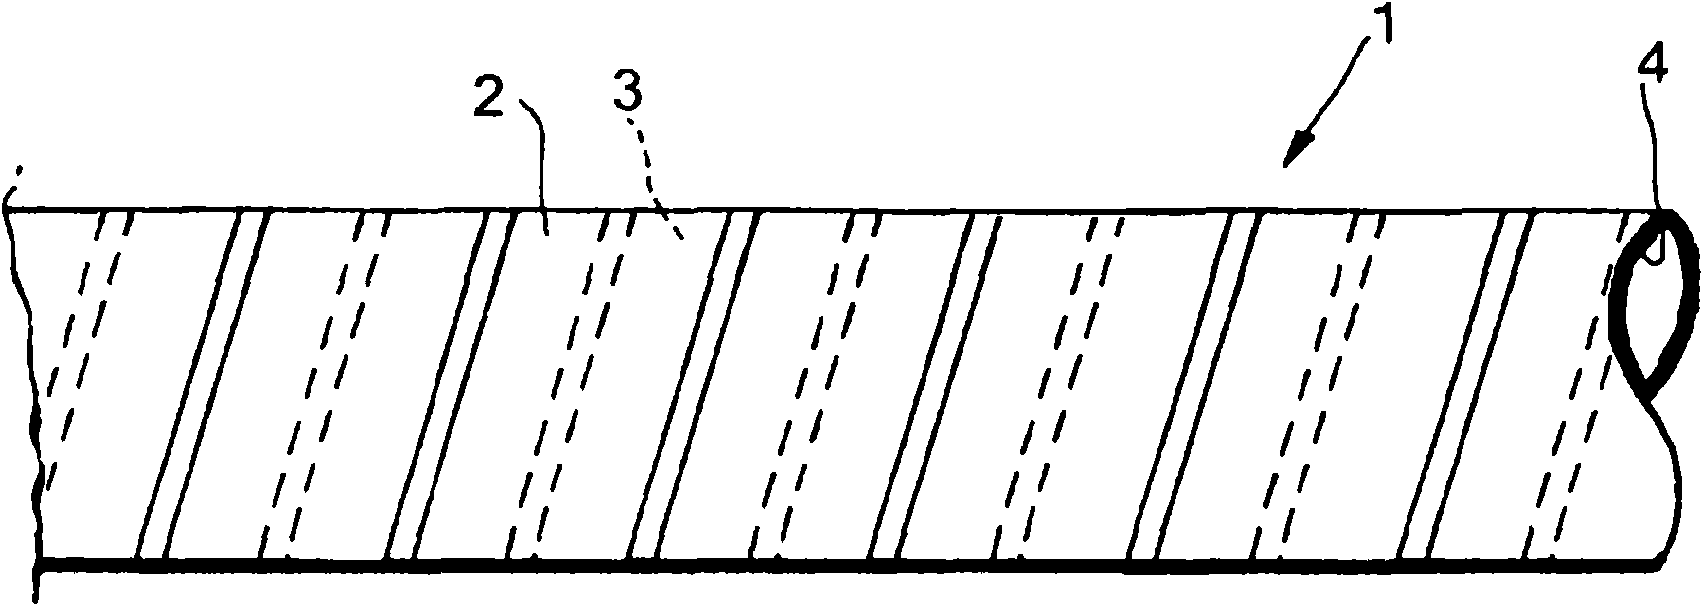 Tubular body comprising two or more layers of helically bended strips